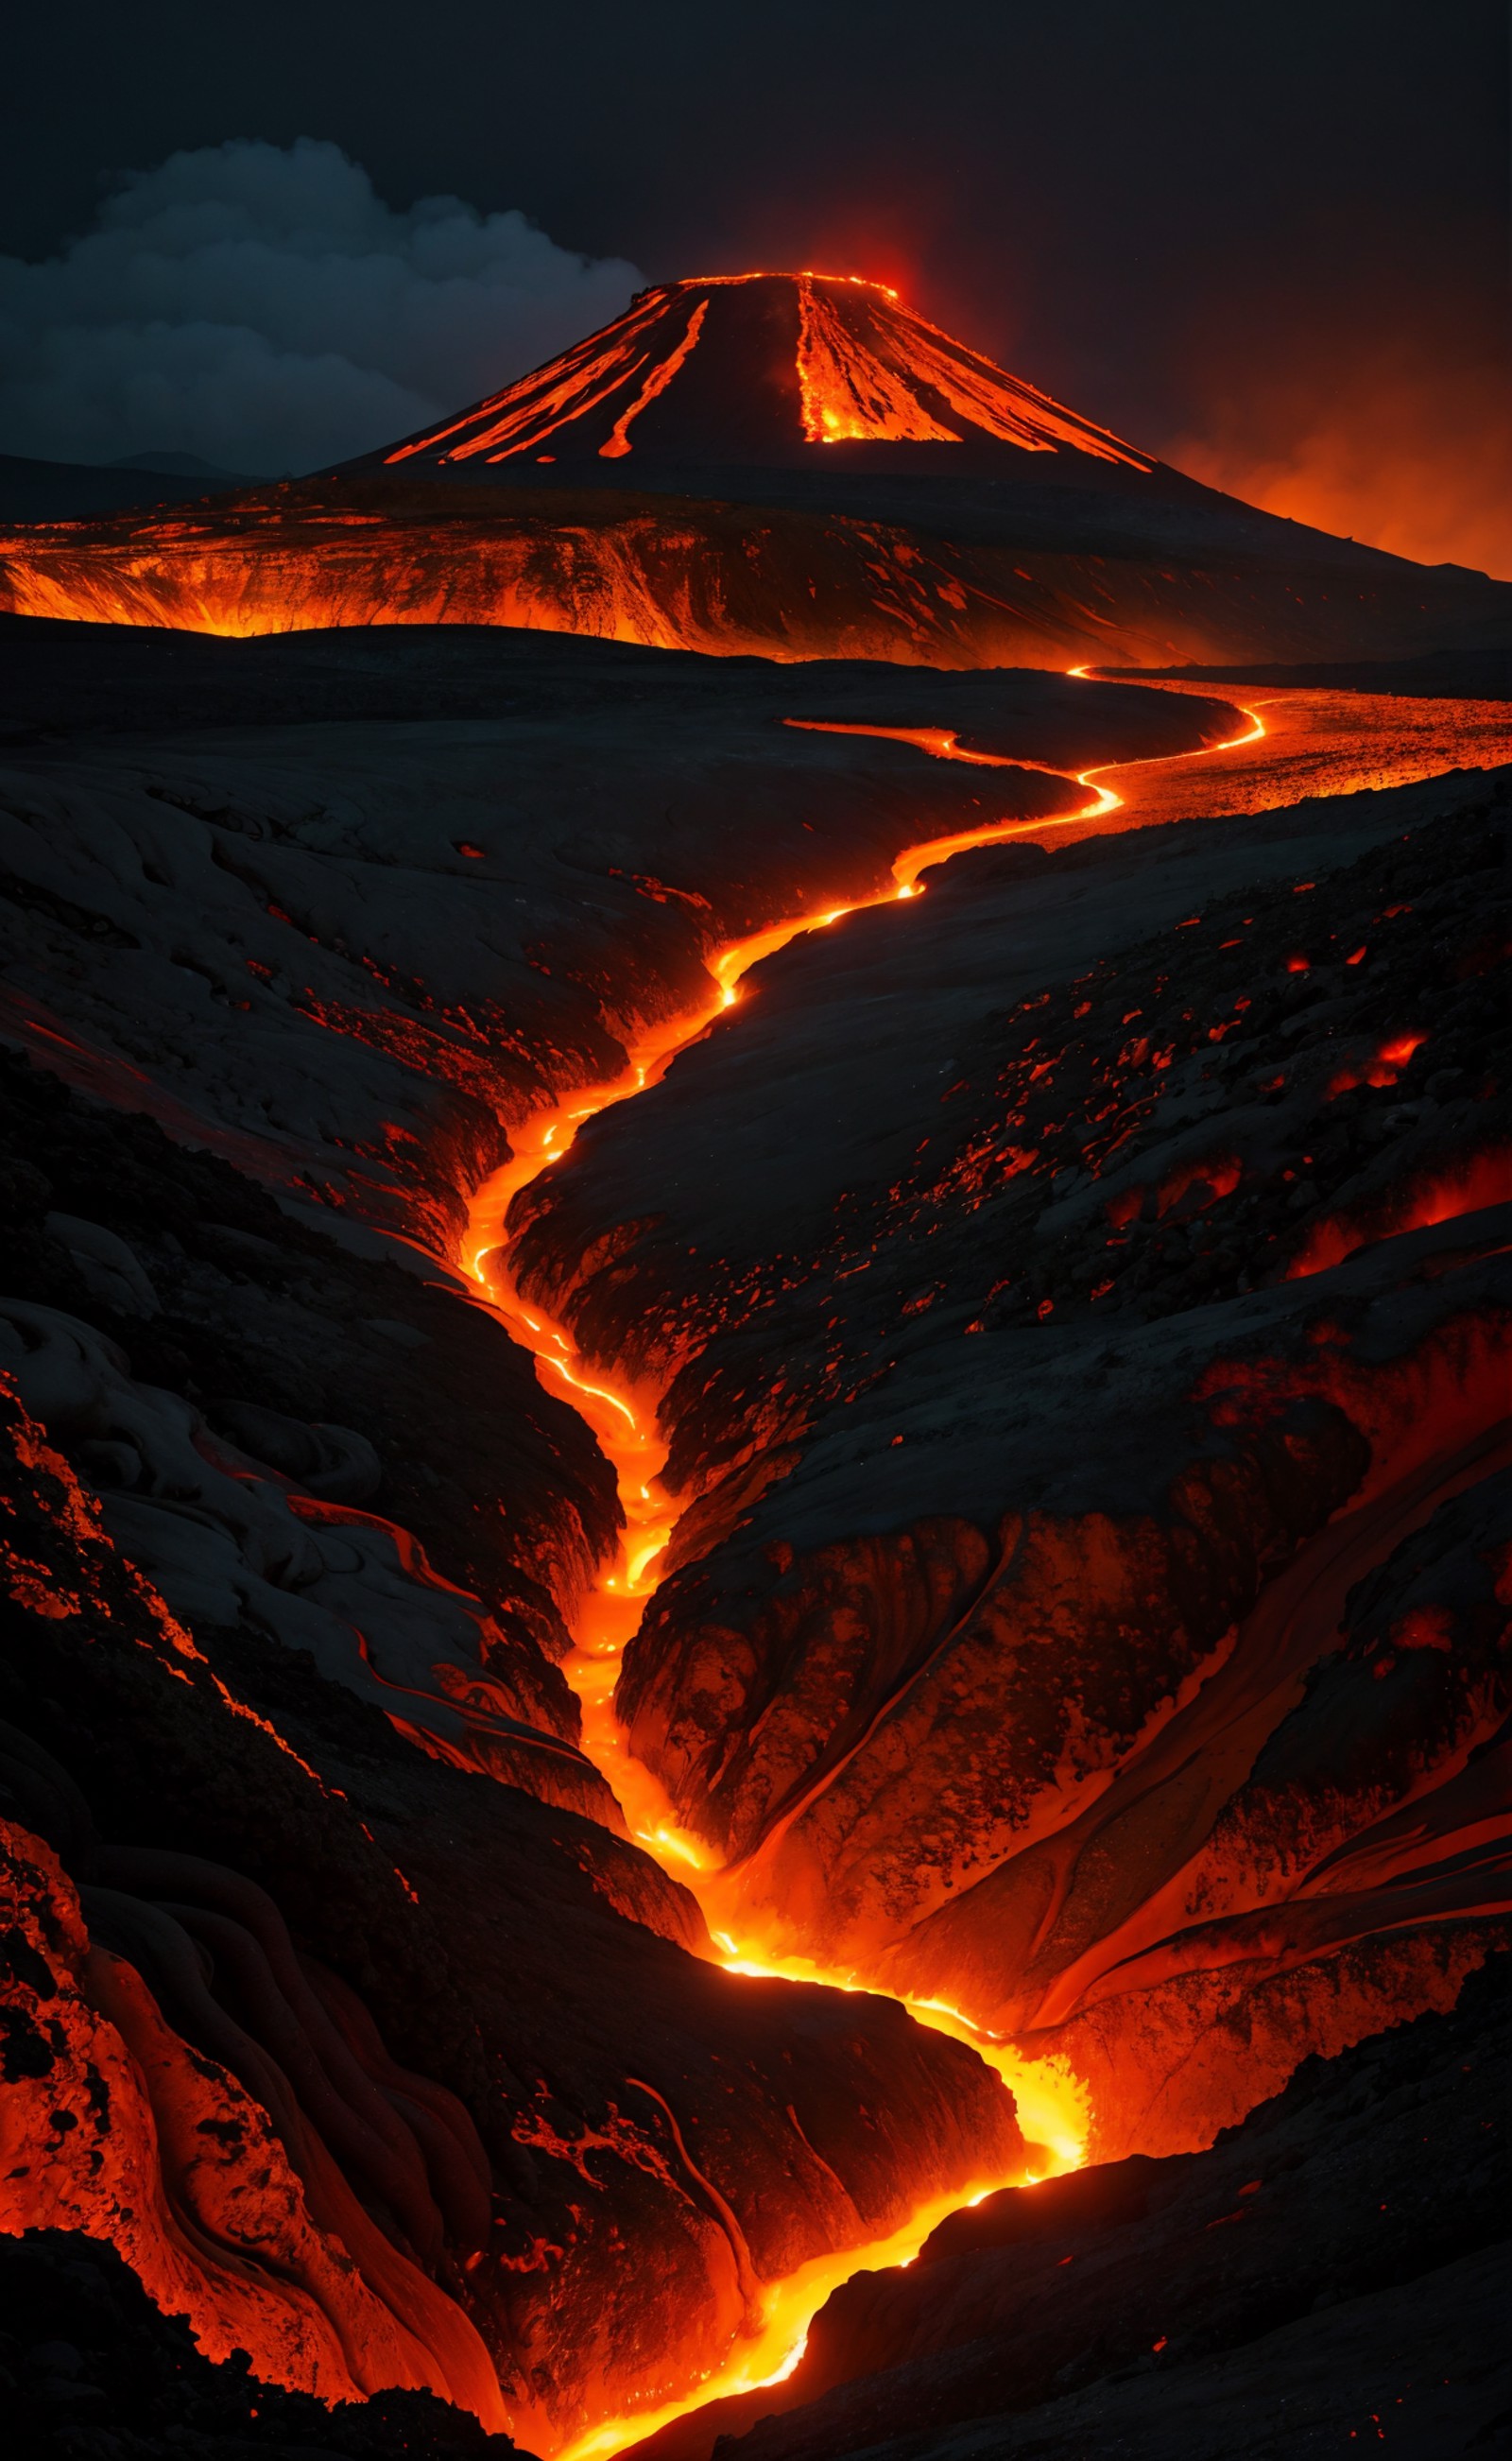 Spectacular, volcanic landscape, billowing smoke, fiery lava, molten rivers, glowing night, 9:16 vertical capture, apocaly...